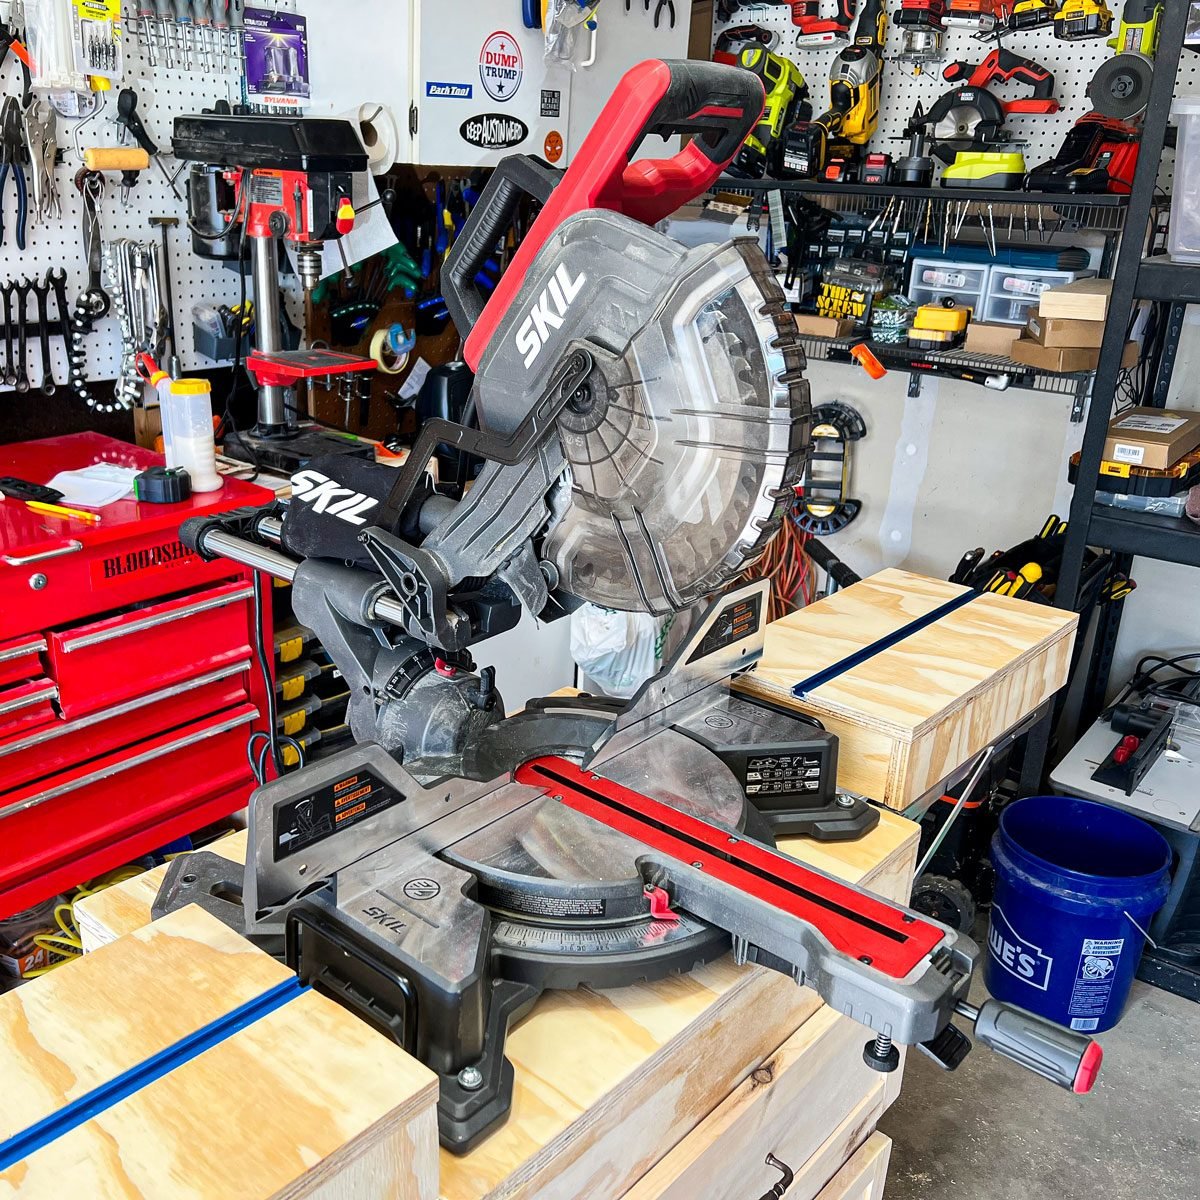 Skil Miter Saw Review: I Tried a SKIL Miter Saw and It's Worth the Hype